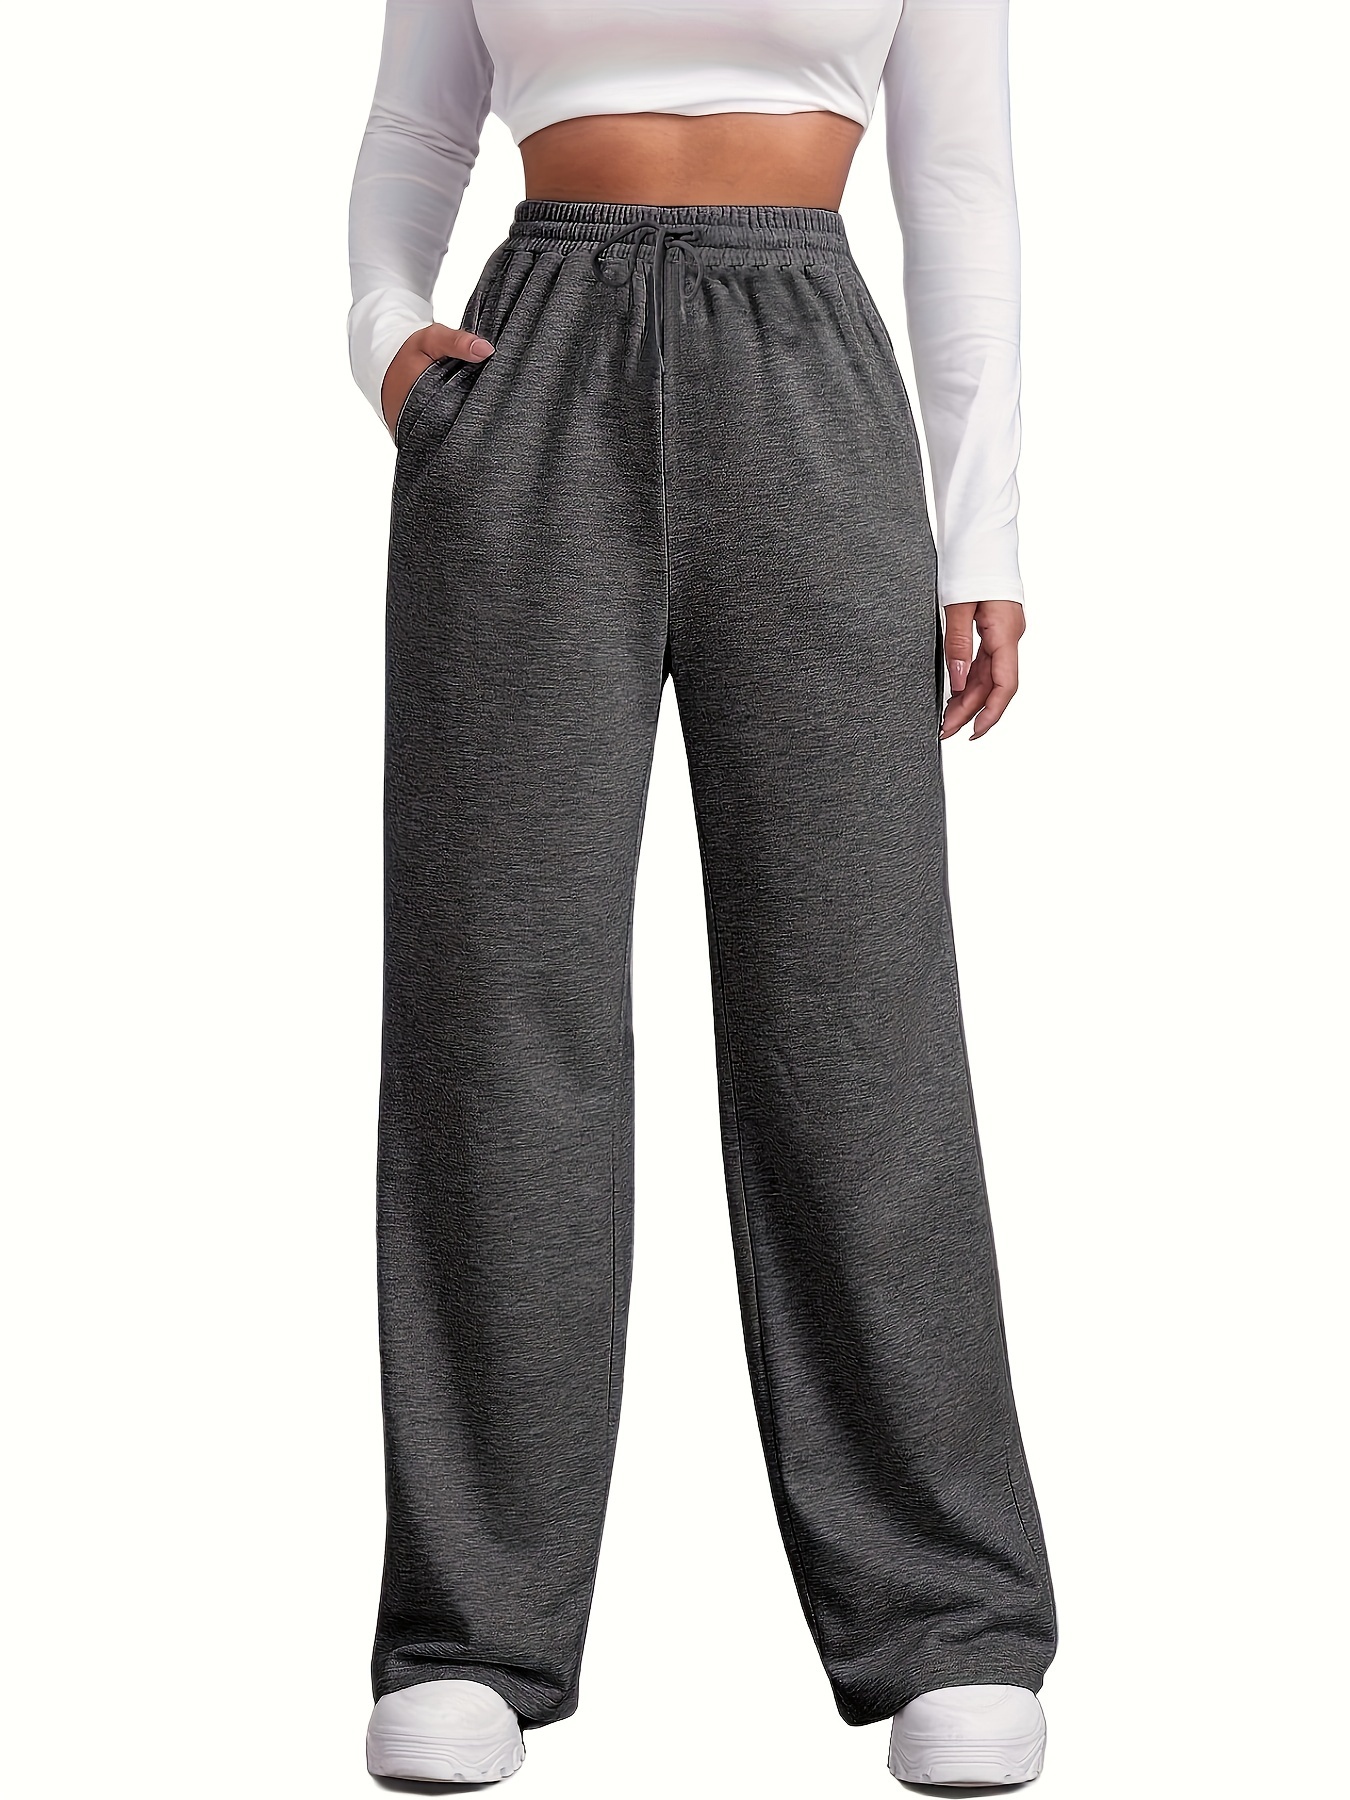 Women's Wide Leg Sweatpants With Elastic Waistband and Drawstring